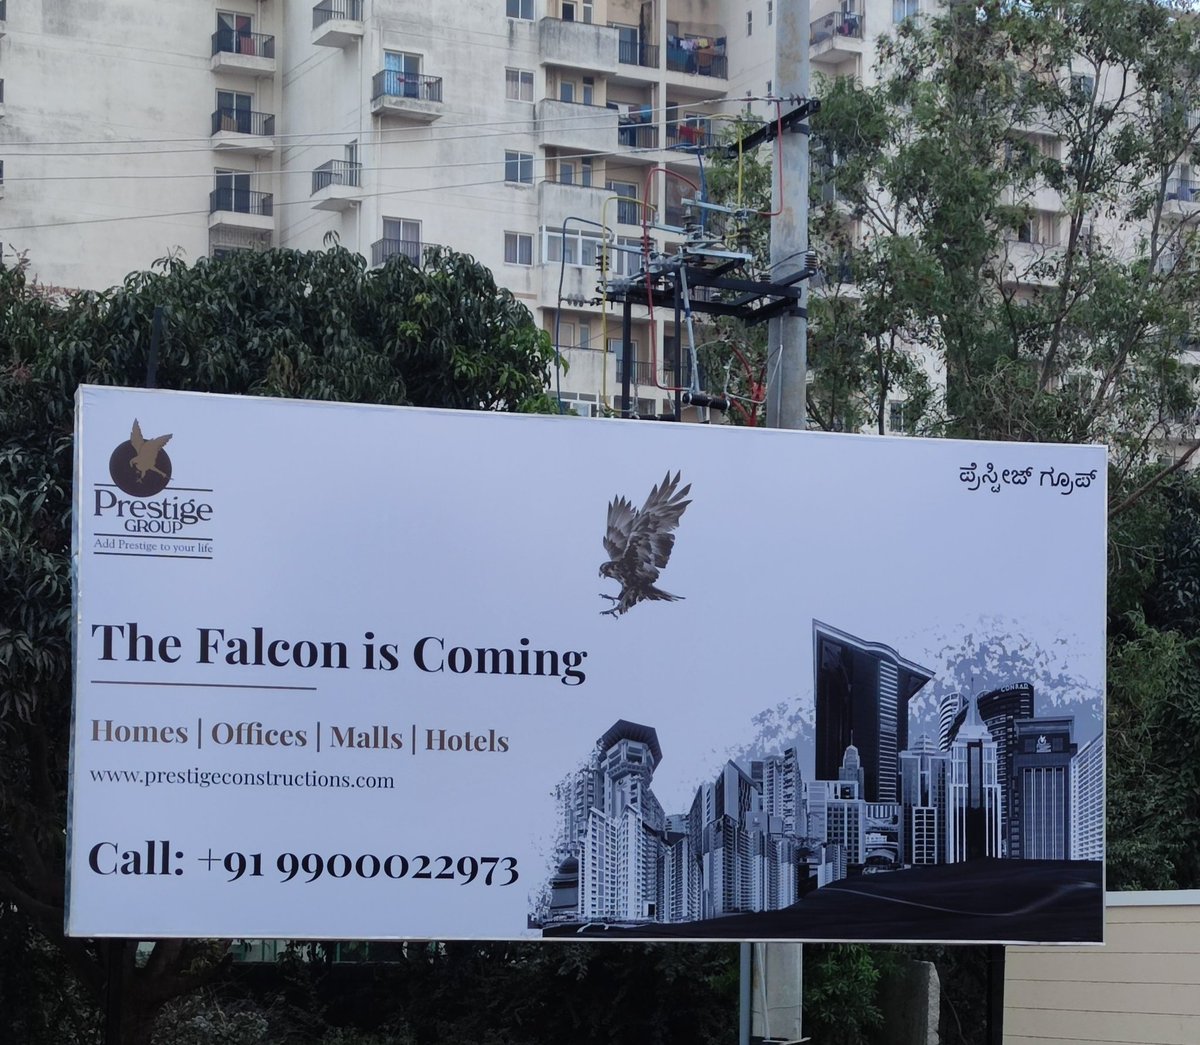 ebird.org/hotspot/L26385…
All over Anekal, this Falcon hasn't let any of the other birds survive. 
We're trying to ensure things are different this time. But facing this ₹638 billion bird is no easy task. WE NEED YOUR SUPPORT. Help us keep our city worth living in.